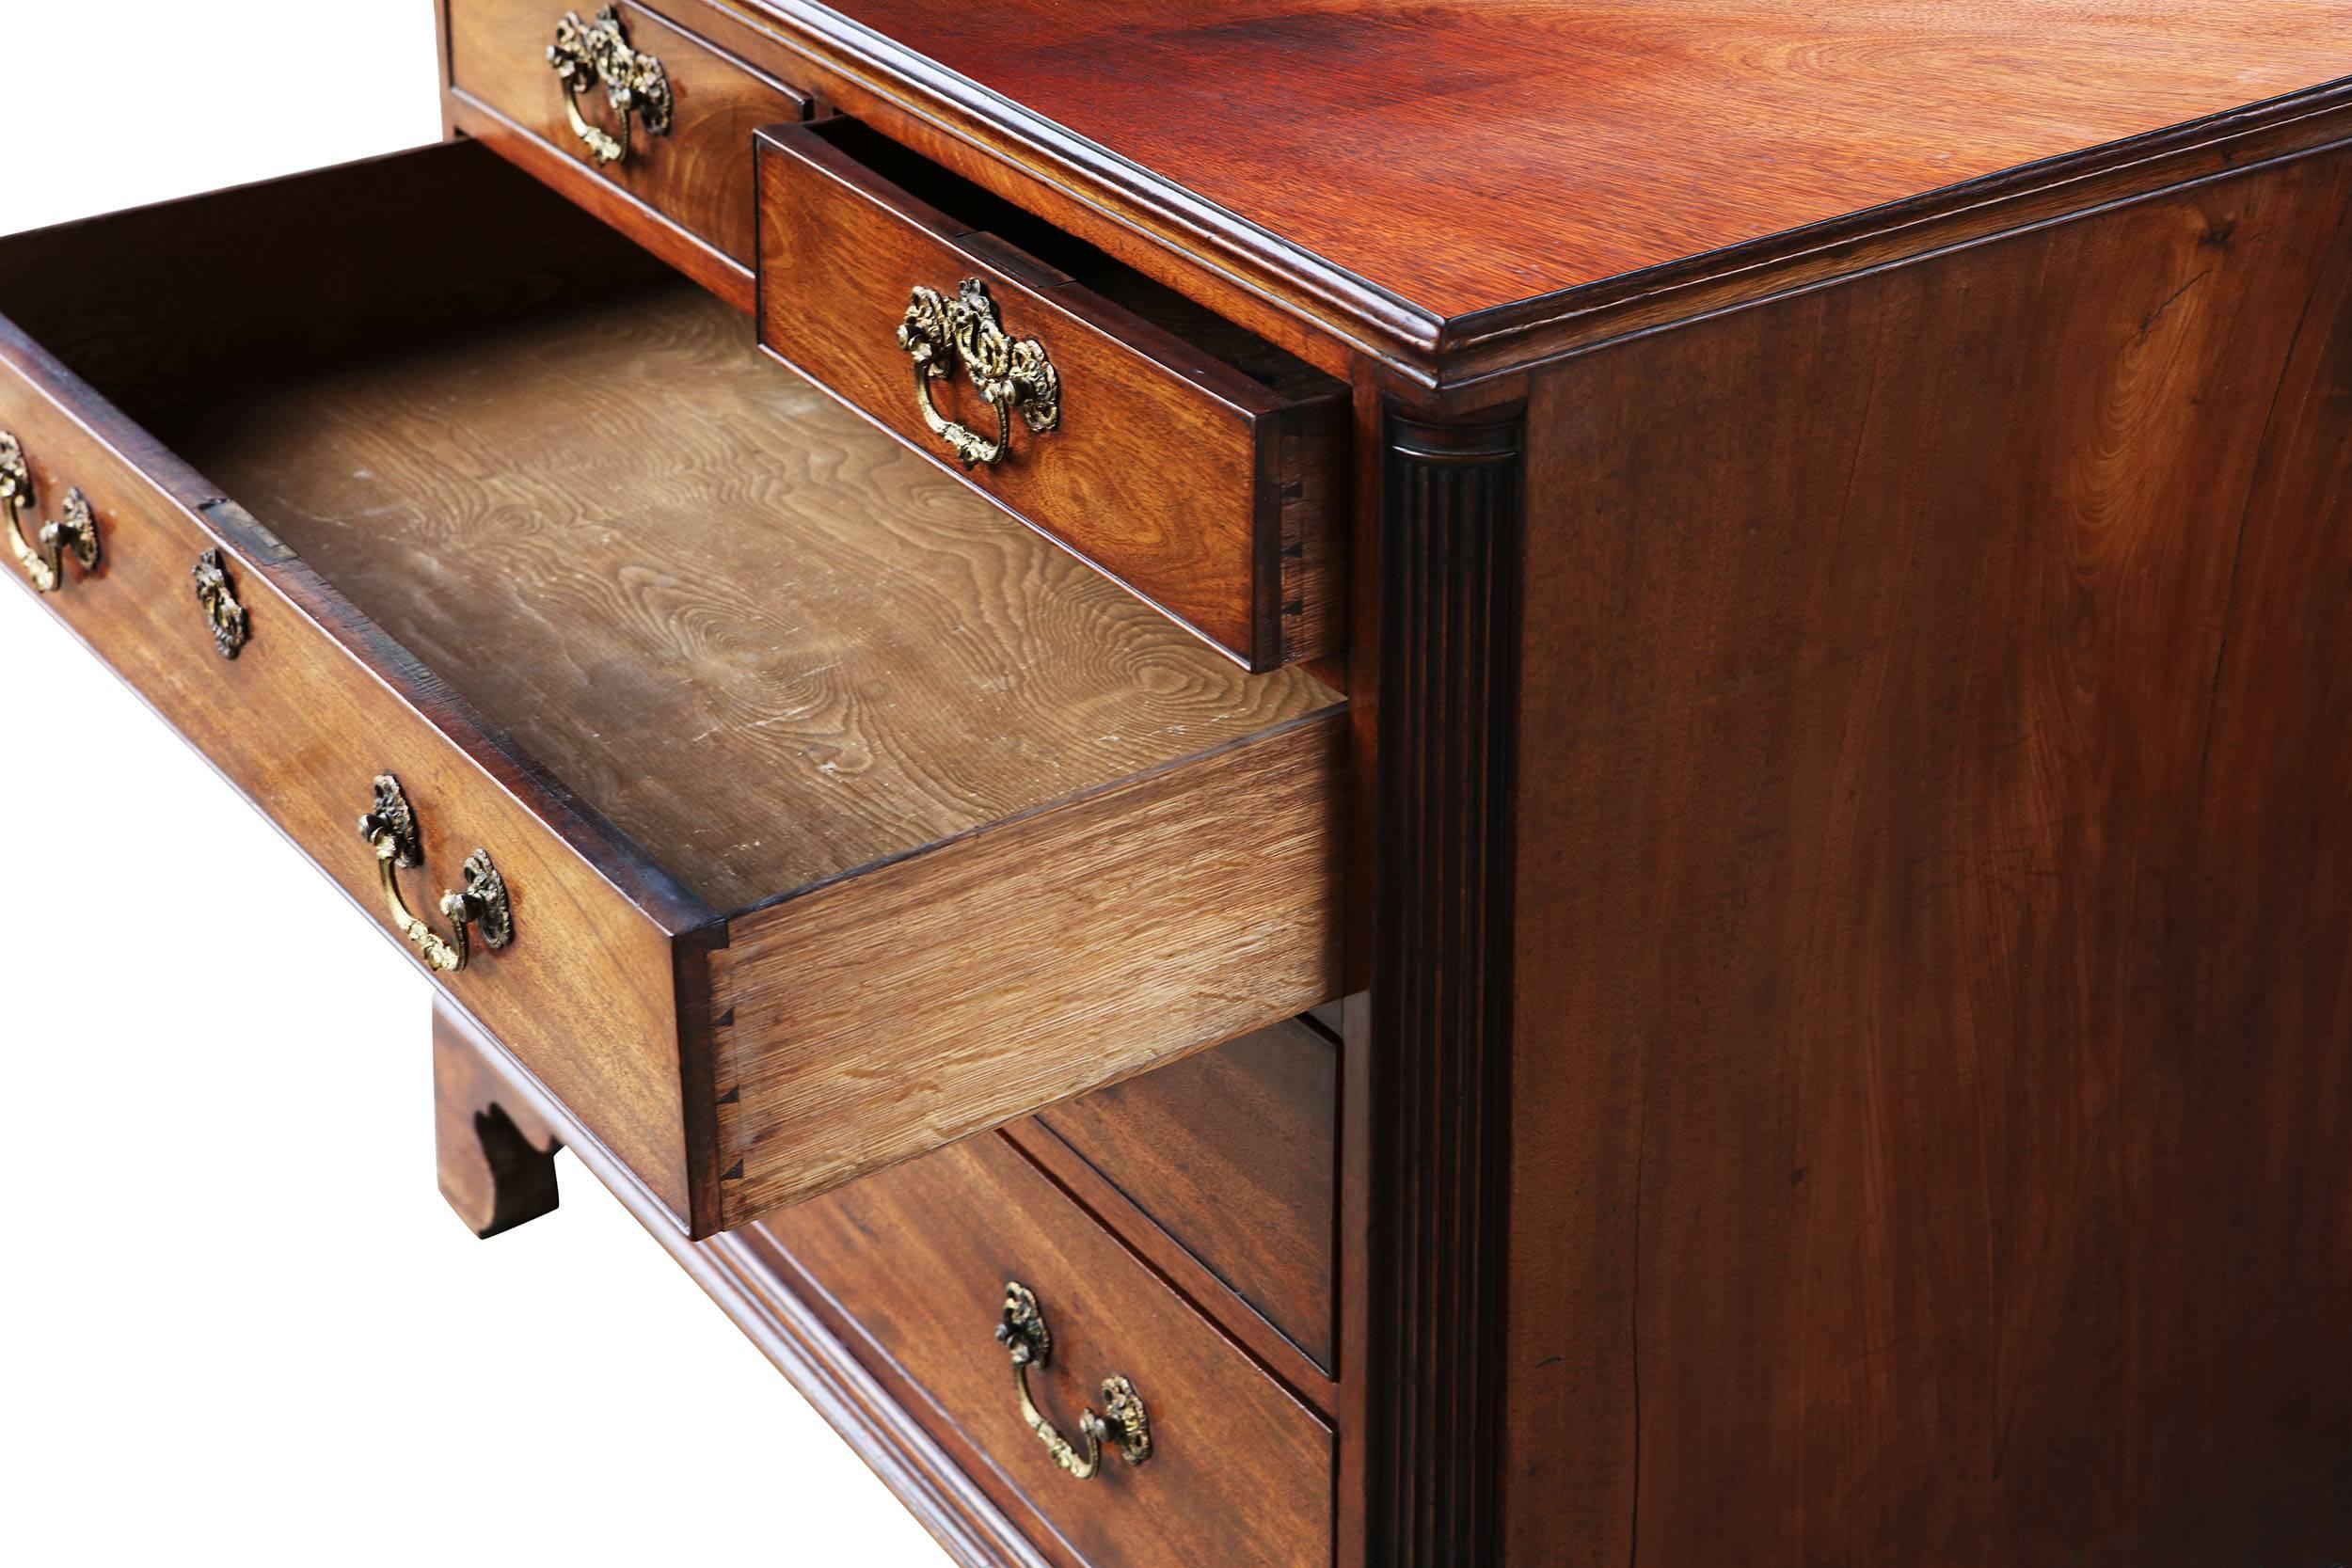 A very fine mid-18th century George II mahogany chest of drawers with two short above three graduated long drawers retaining their original lacquered brass hardware, the front corners with recessed fluted quarter column pilasters, the whole raised